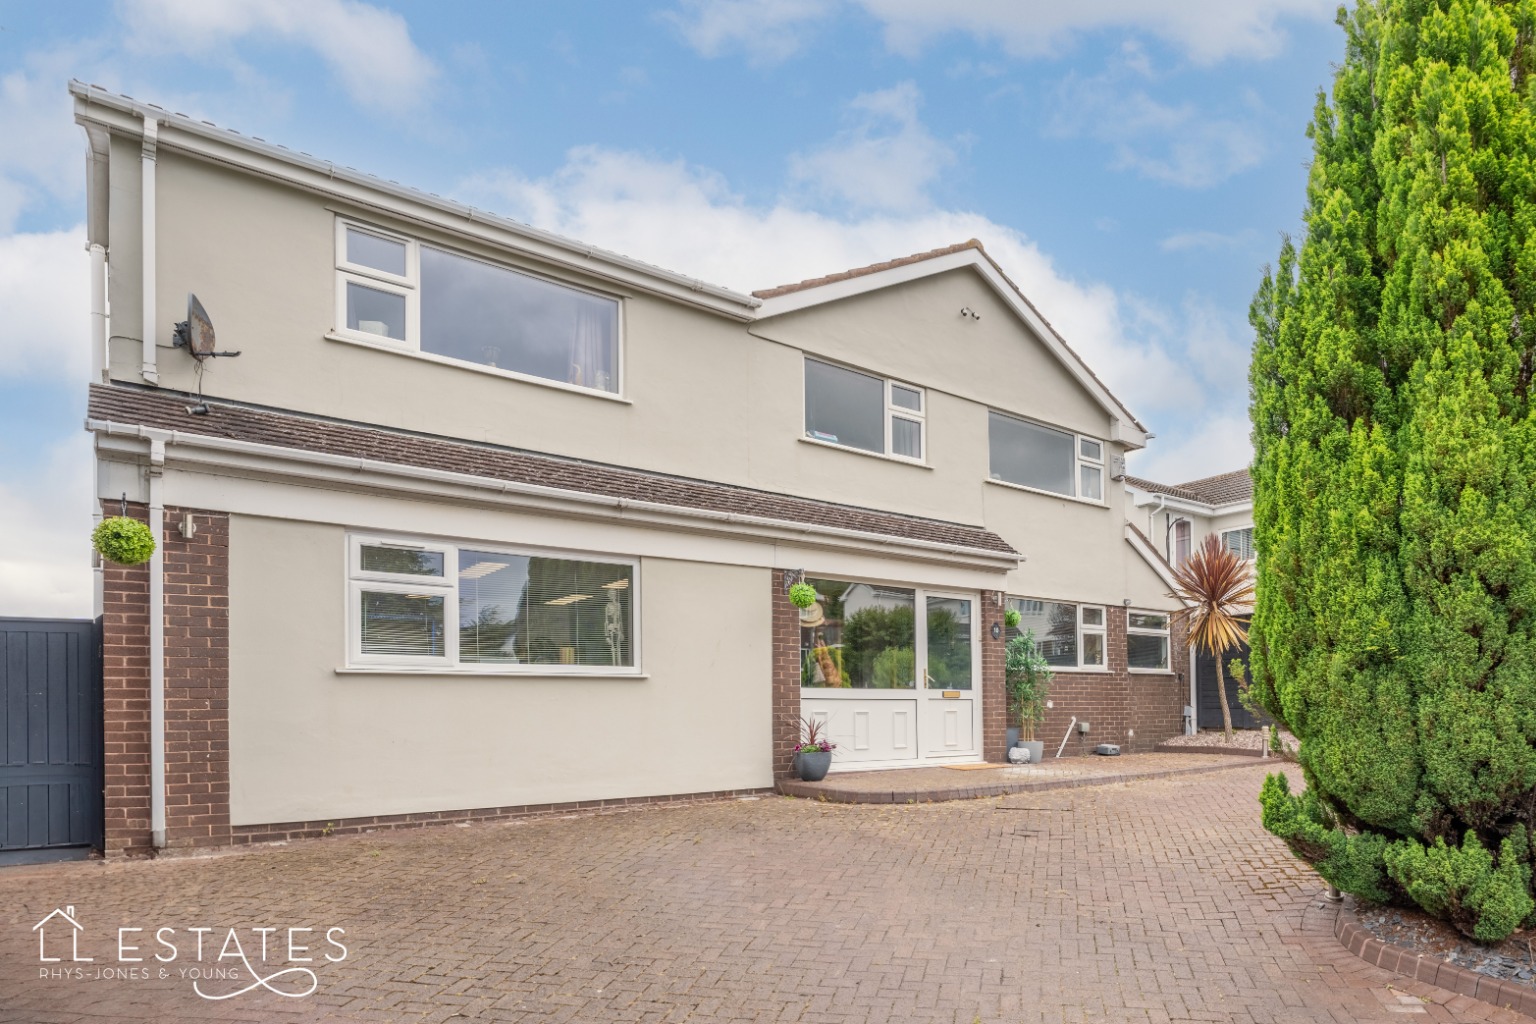 5 bed detached house for sale in Parc Aberconwy, Denbighshire  - Property Image 1